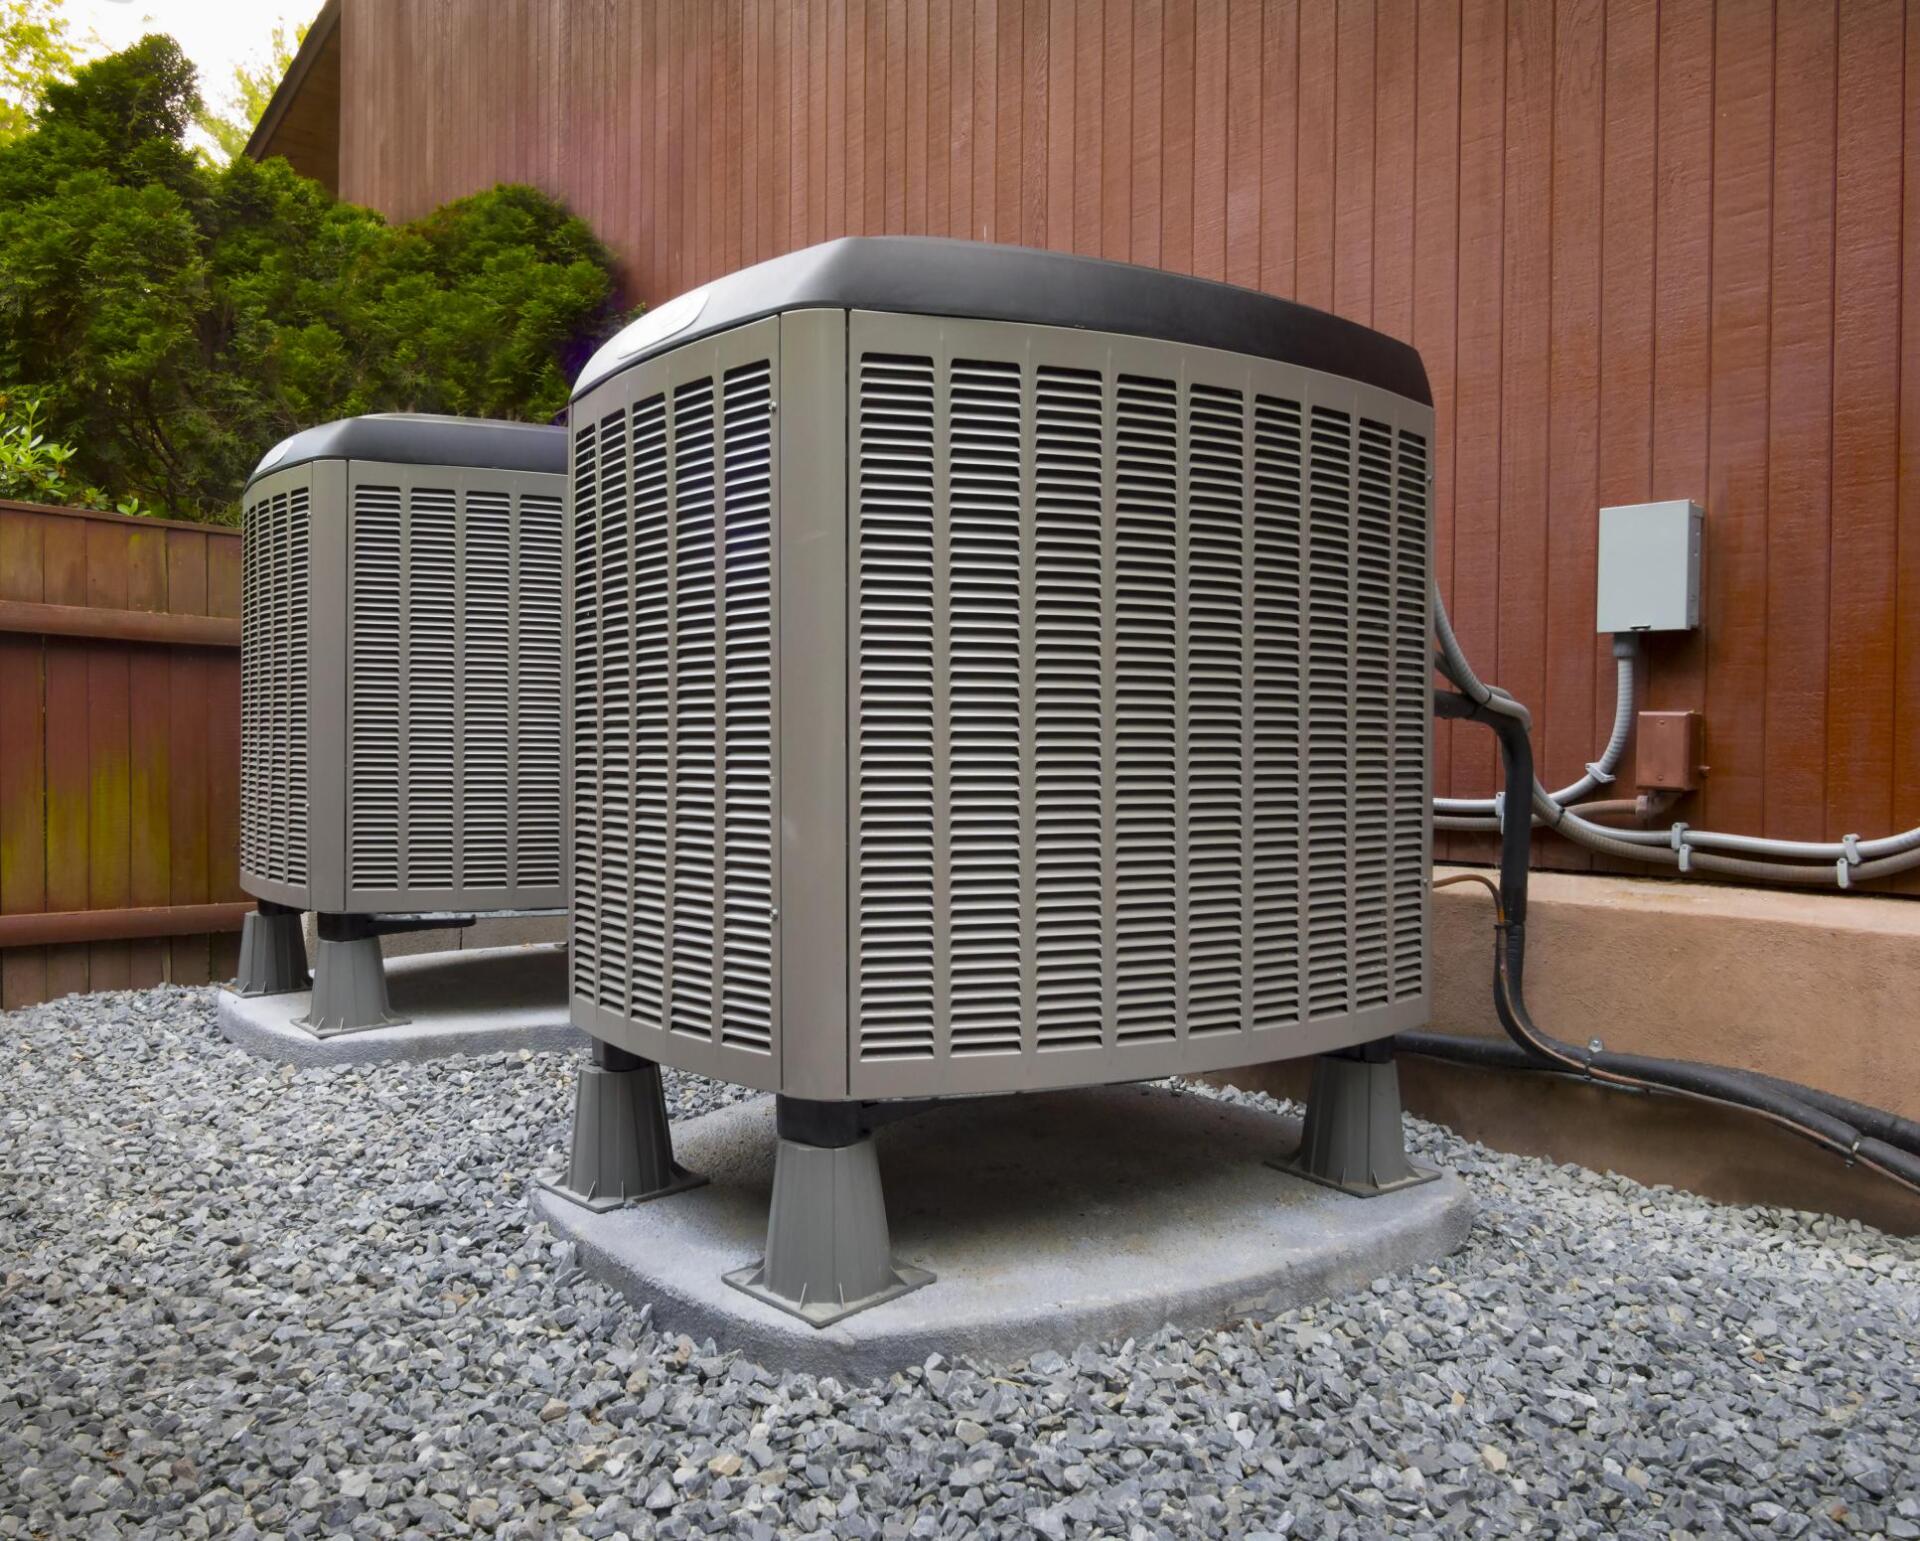 a two outdoor central air conditioner